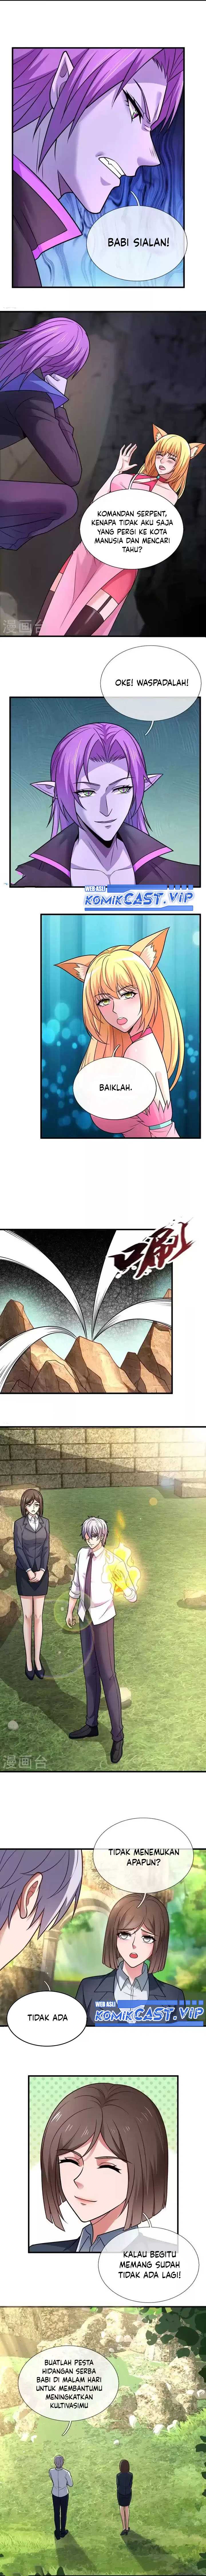 City of Heaven TimeStamp Chapter 336